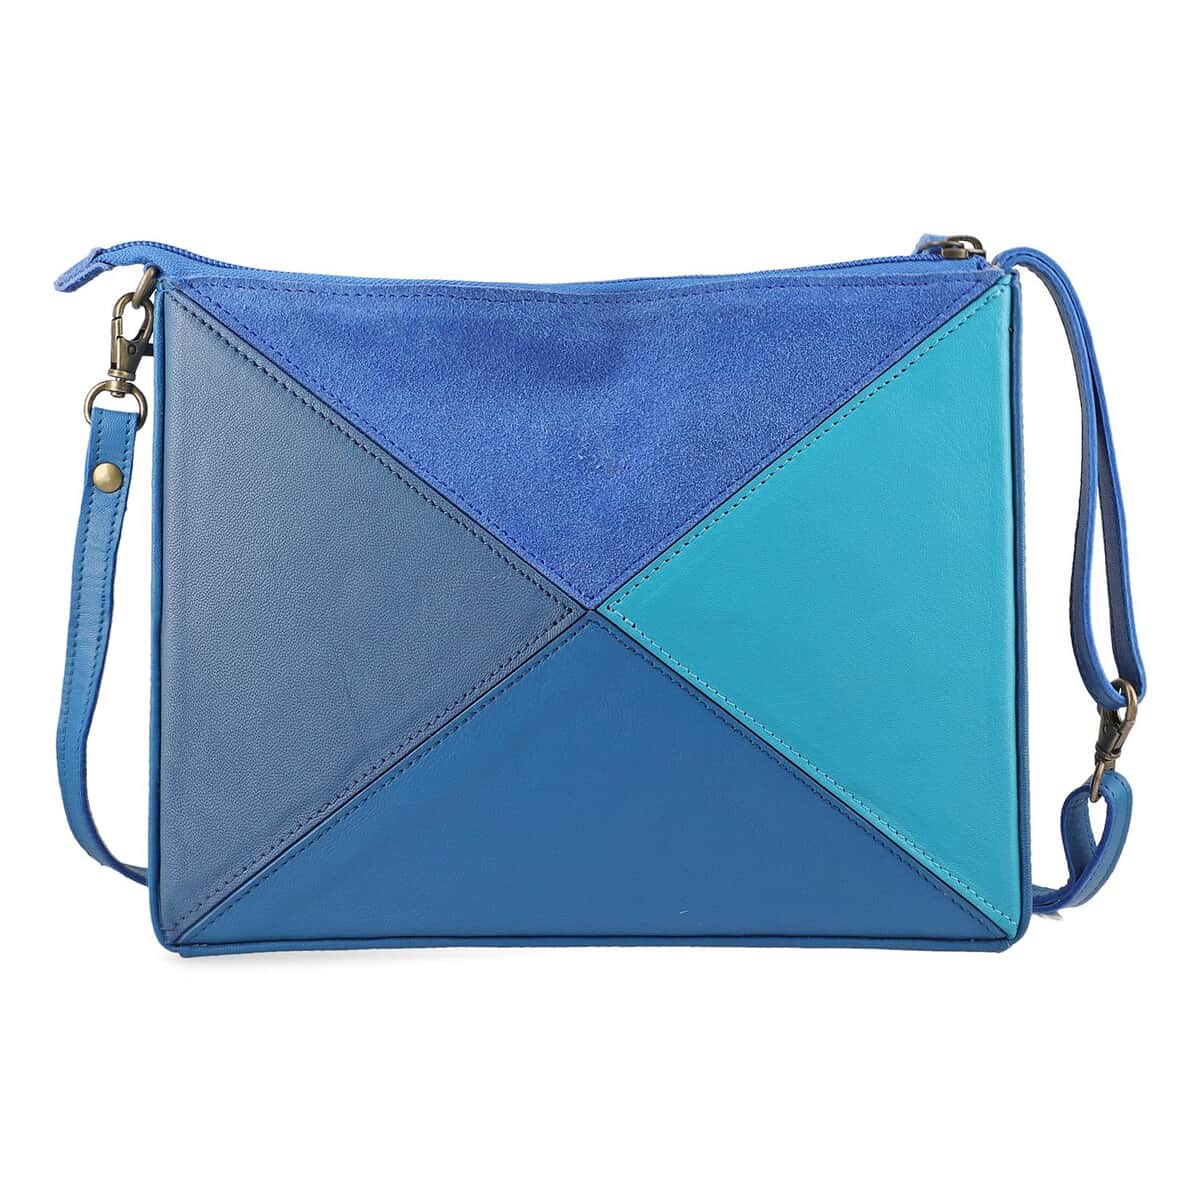 "100% Genuine leather Collapsible Crossbody Bag Size: 8Lx10Hx2W inches Color: Blue " image number 0